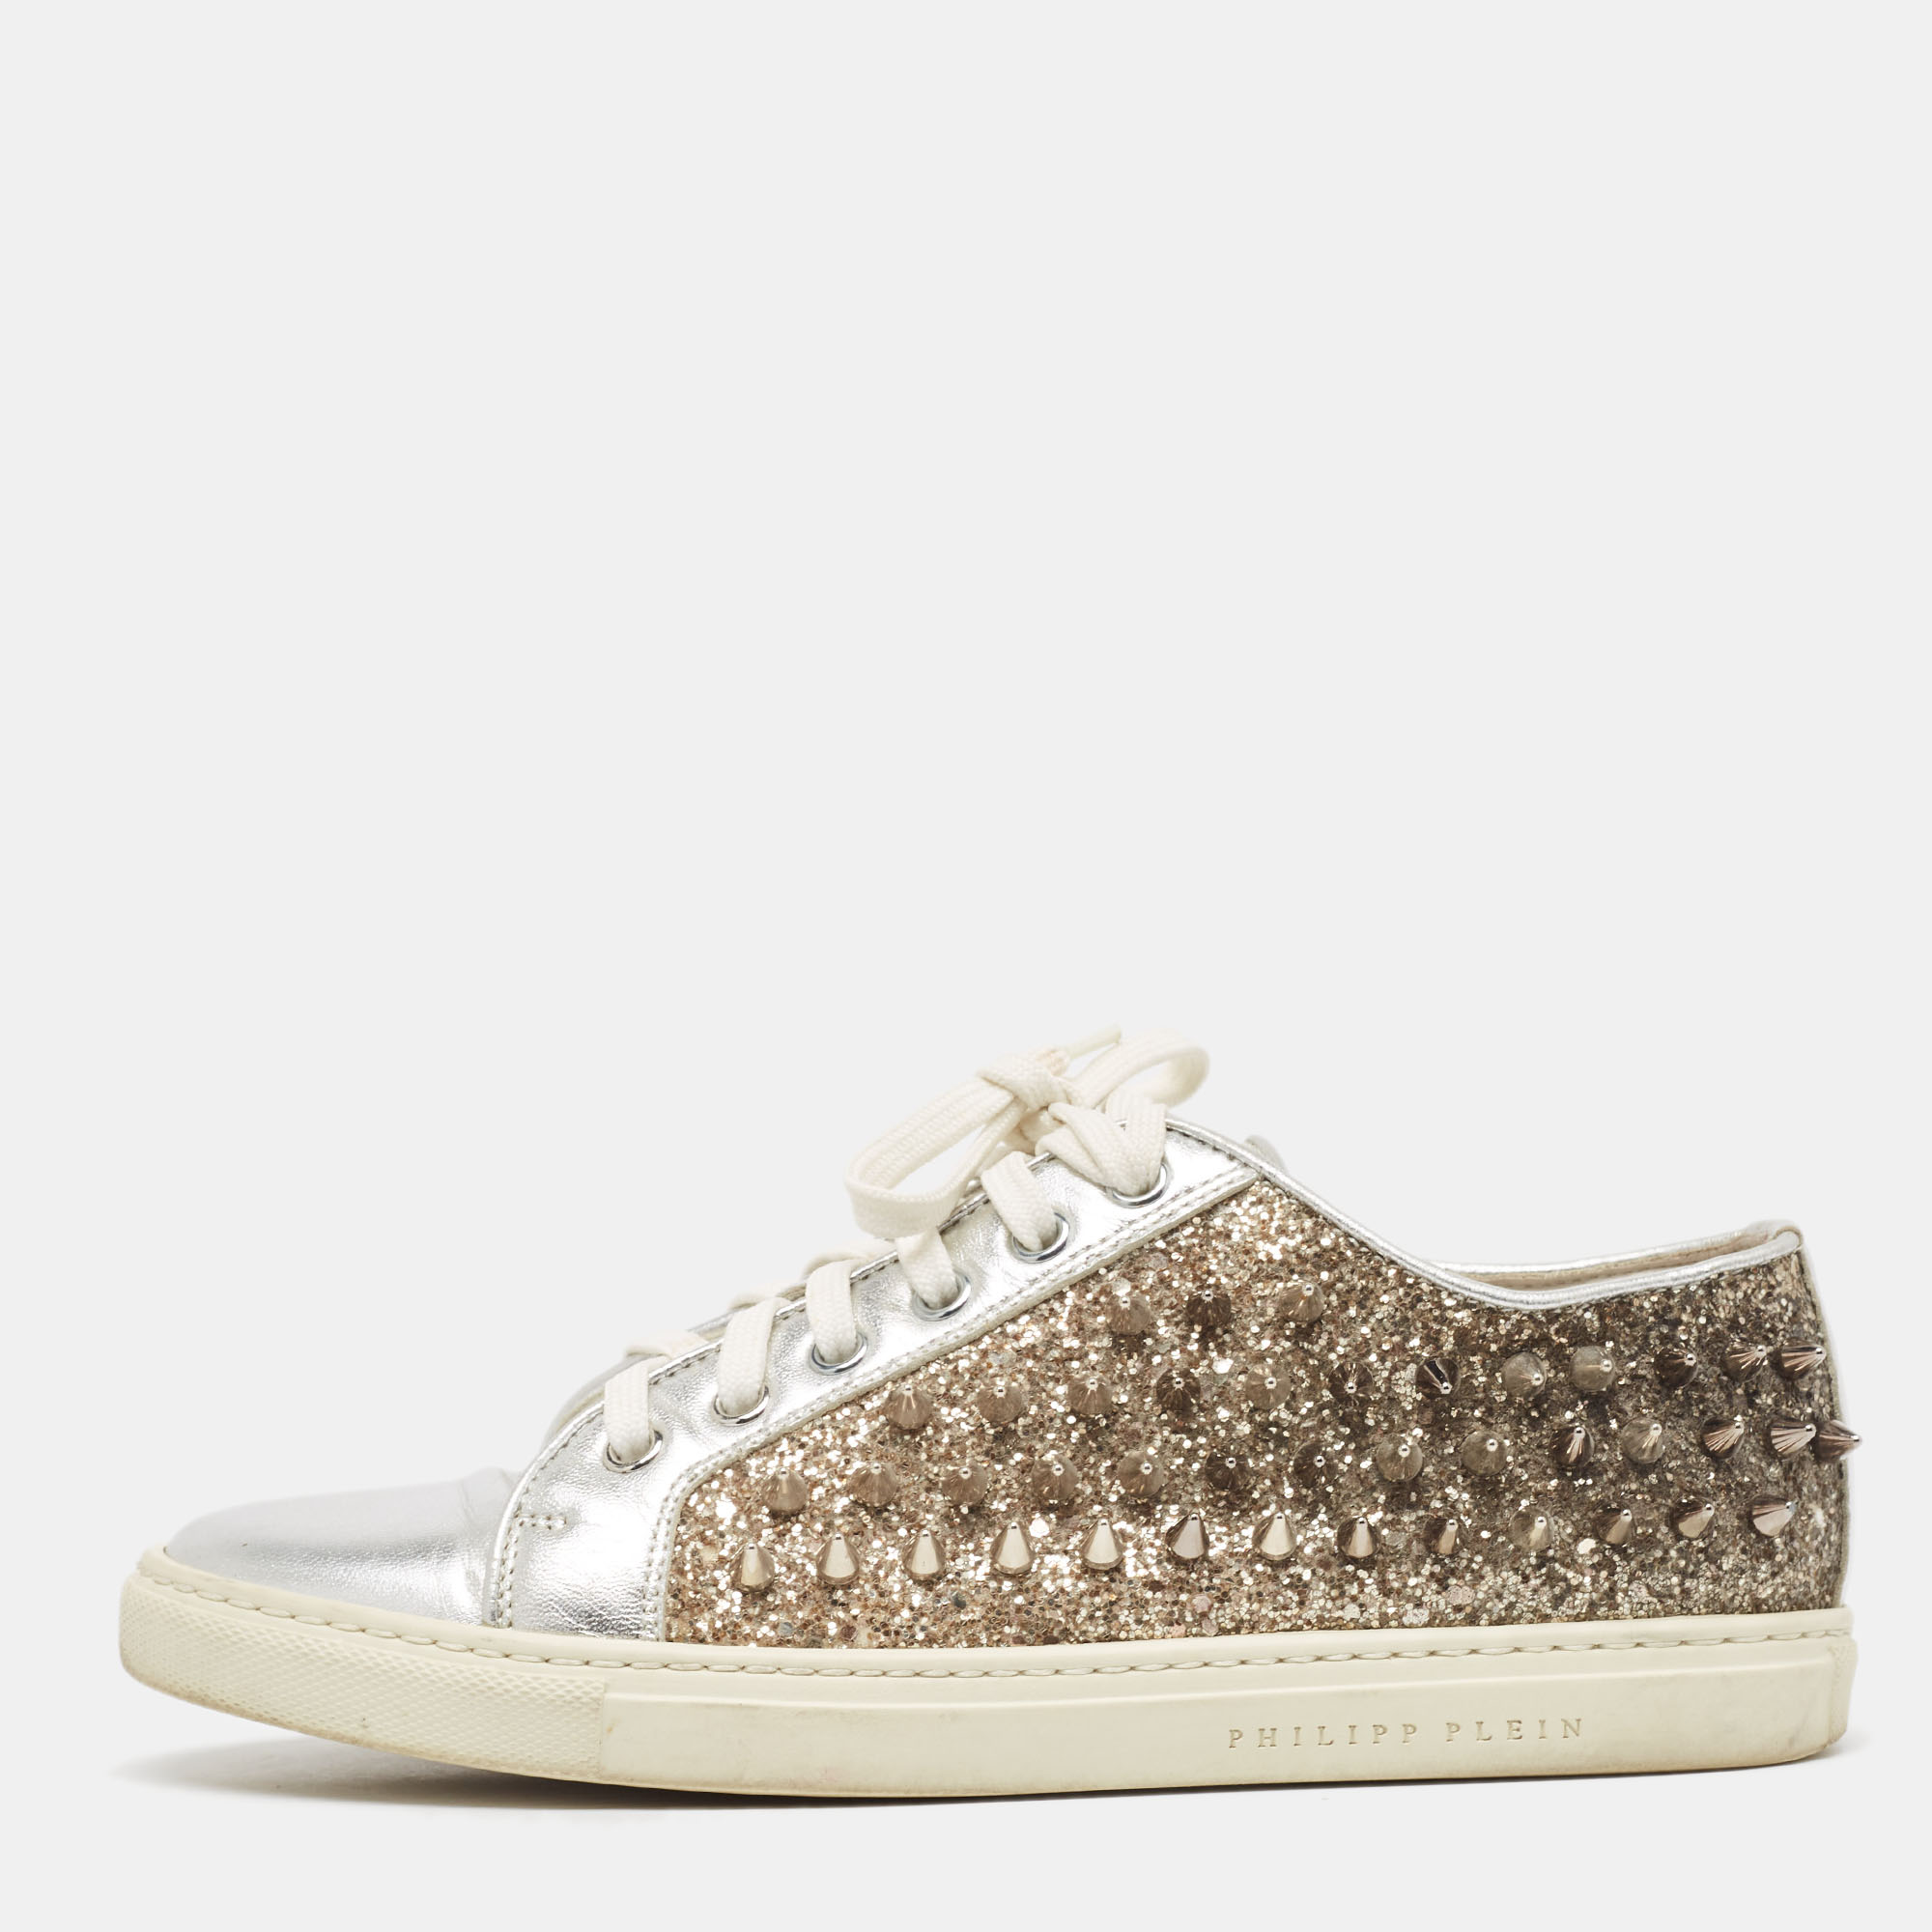 Philipp plein silver/gold leather and glitter spike sneakers size 36